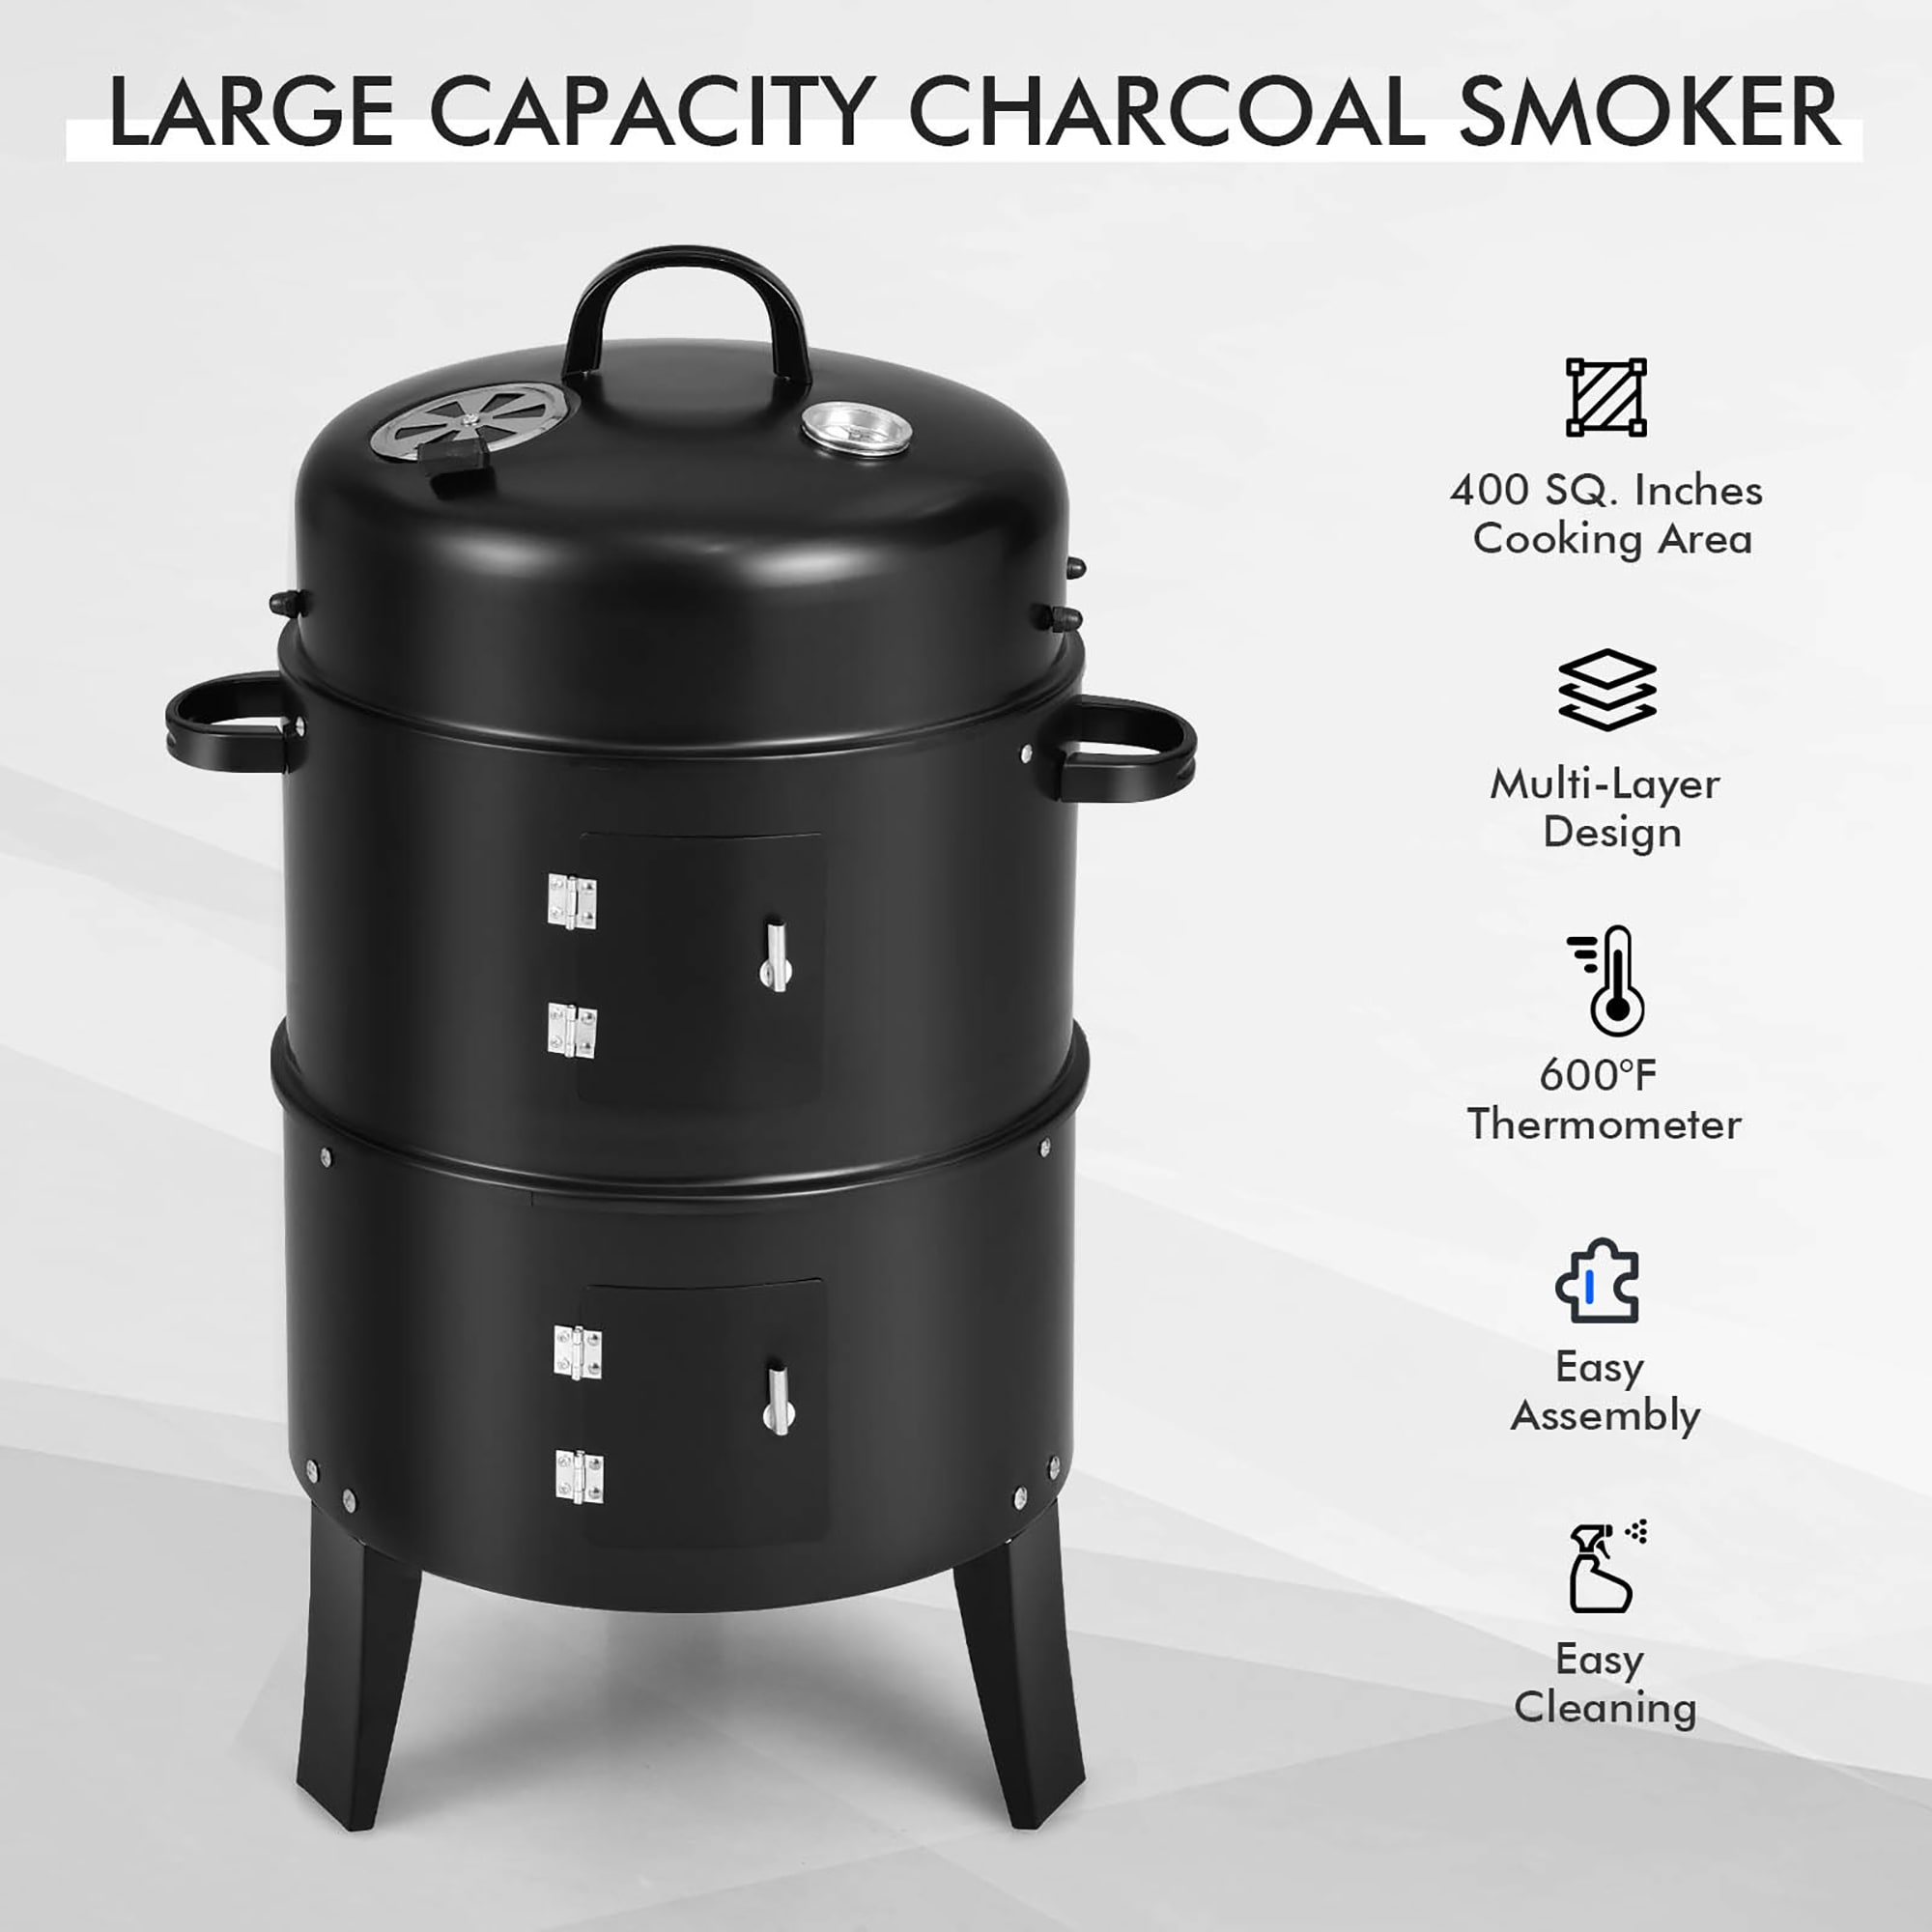 https://ak1.ostkcdn.com/images/products/is/images/direct/e0af8c681314e22436655c4475f2156491aeeb01/Costway3-in-1-Vertical-Charcoal-Smoker-Portable-BBQ-Smoker-Grill-with.jpg